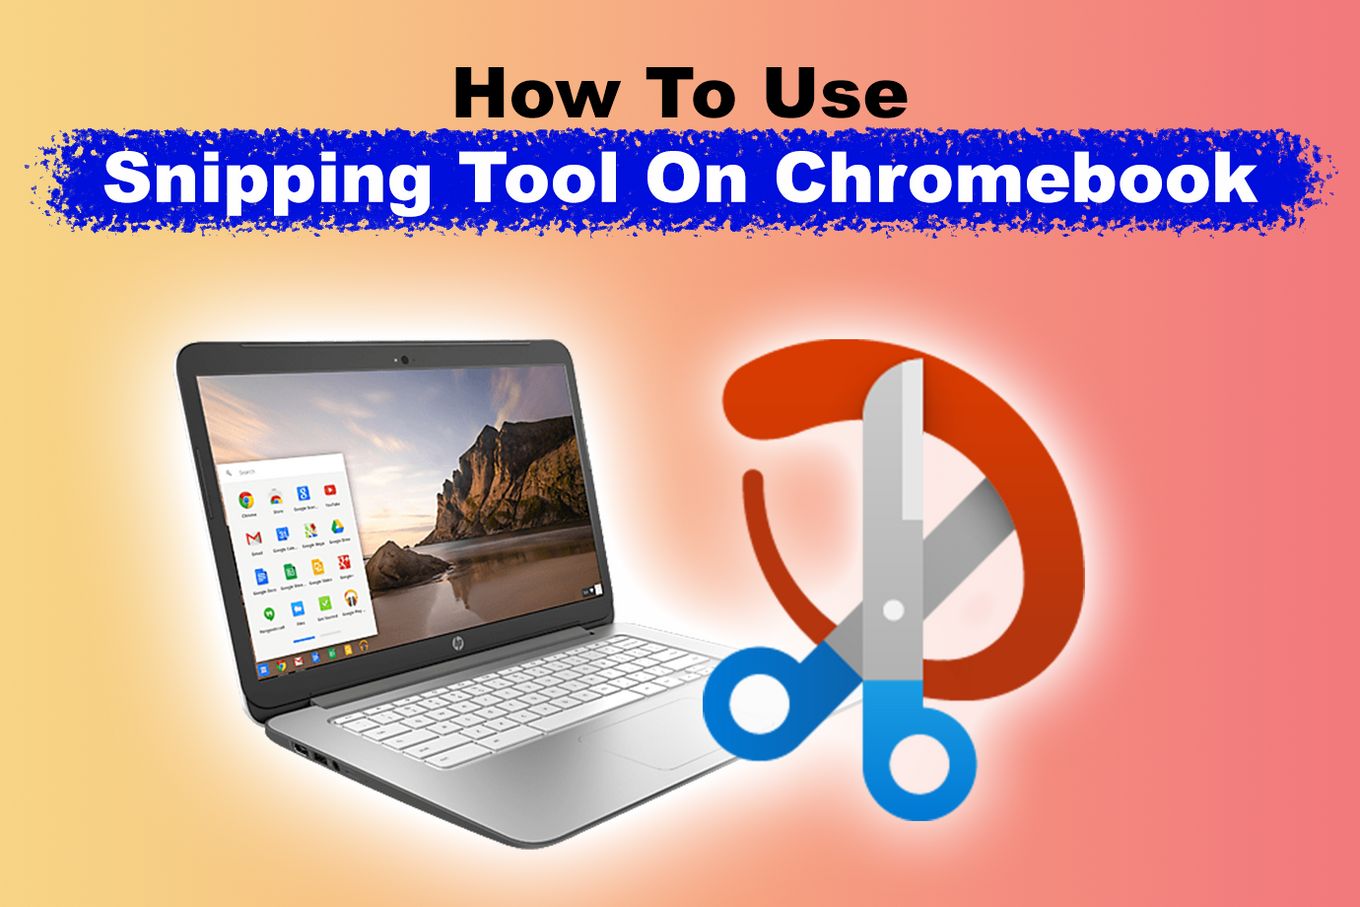 How to Use Snipping Tool on Chromebook